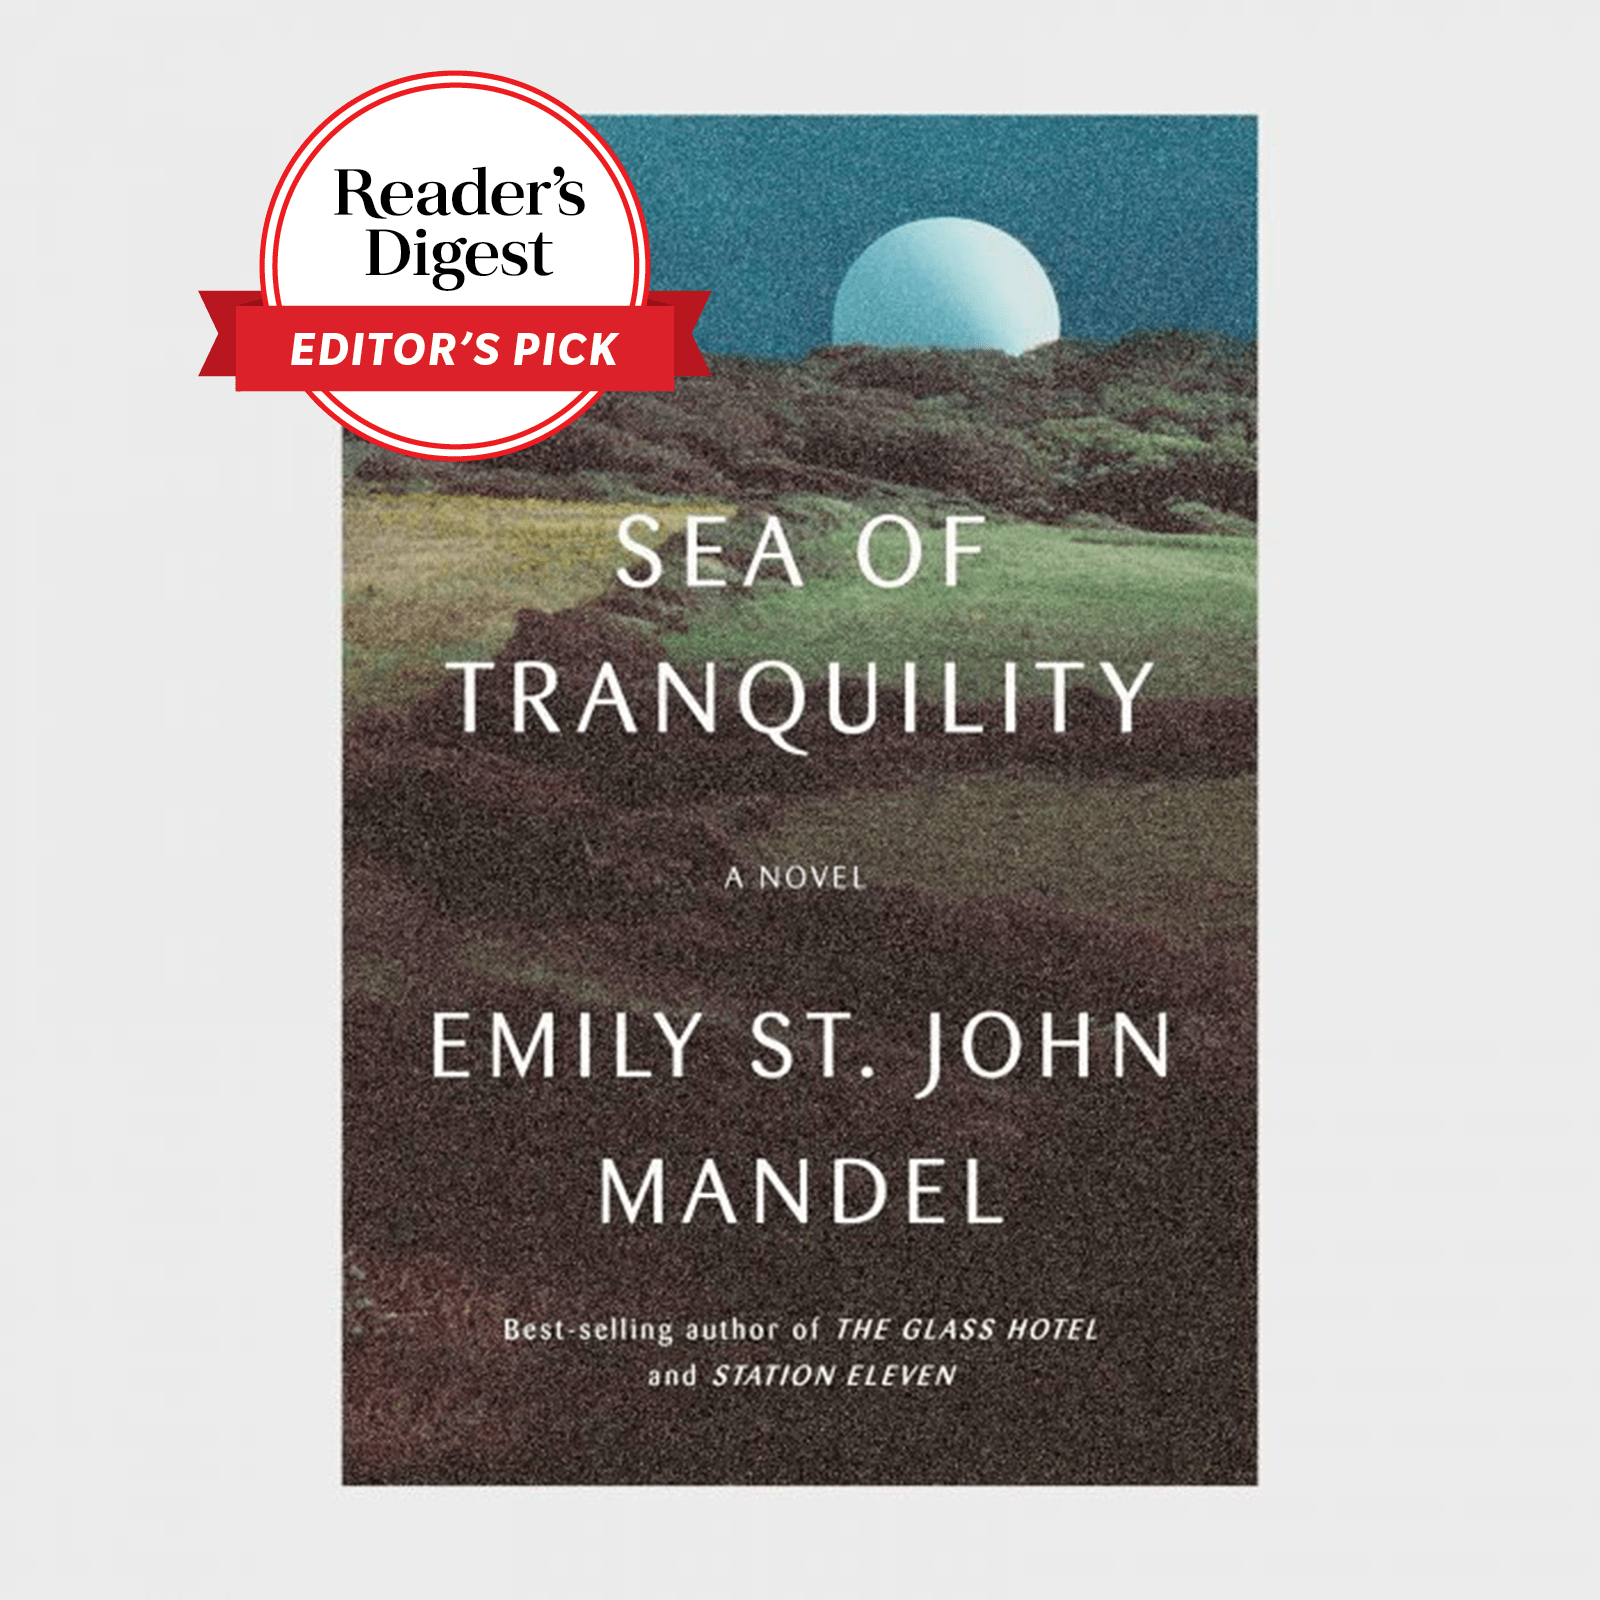 <p class=""><strong>Release date:</strong> Apr. 5, 2022</p> <p>In a flood of new book releases, Emily St. John Mandel's work always stands out. Whether you loved the <a href="https://www.rd.com/list/science-fiction-books/" rel="noopener noreferrer">sci-fi book</a> <em>Station Eleven </em>or fell for Vincent in <a href="https://www.amazon.com/Glass-Hotel-Emily-John-Mandel/dp/052556294X/?tag=reader_msn-20" rel="noopener noreferrer"><em>The Glass Hotel</em></a>, you'll be swept away by the author's mind yet again in <em><a href="https://www.amazon.com/Sea-Tranquility-Emily-John-Mandel/dp/0593321448/" rel="noopener noreferrer">Sea of Tranquility</a>.</em> This time, she takes us from the wilds of North American forests to future cities to the stark artificiality of a moon colony. It's a novel about human grit through literal space and time—a multidimensional, multi-timeline story for readers who like to sink their teeth into a good book.</p> <p class="listicle-page__cta-button-shop"><a class="shop-btn" href="https://www.amazon.com/Sea-Tranquility-Emily-John-Mandel/dp/0593321448/">Shop Now</a></p>